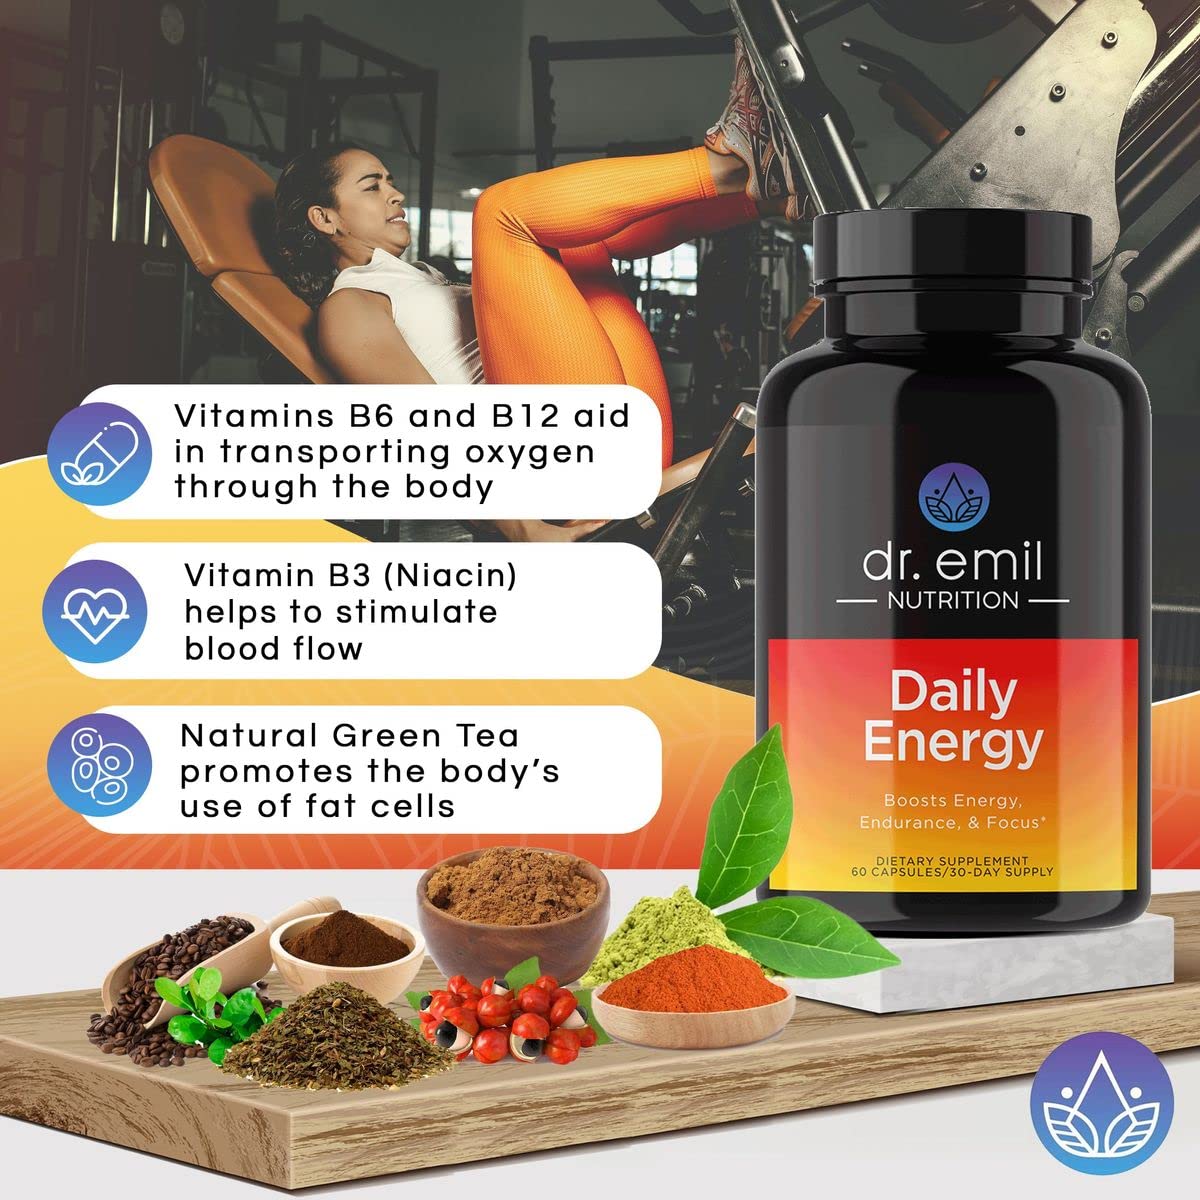 DR EMIL NUTRITION Daily Energy Supplement - Sugar Free Energy Pills with 160mg Caffeine Per Serving - Energy Booster & Focus Supplement with Guarana Extract, L-Taurine & L-Theanine